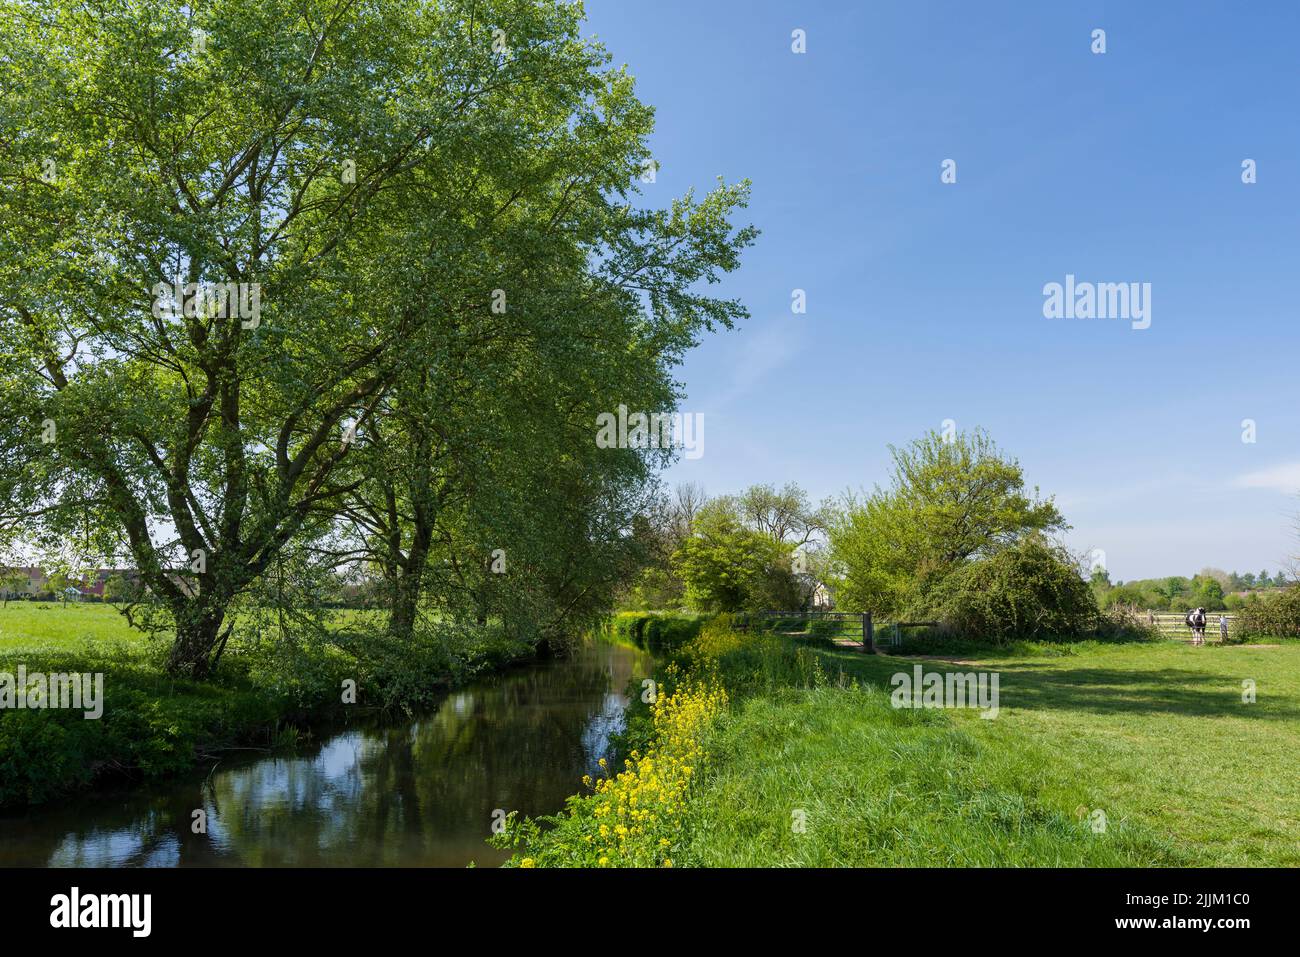 The River Yeo, also known as the Congresbury Yeo, along the Two Rivers Way at Congresbury on a sunny spring day, North Somerset, England. Stock Photo